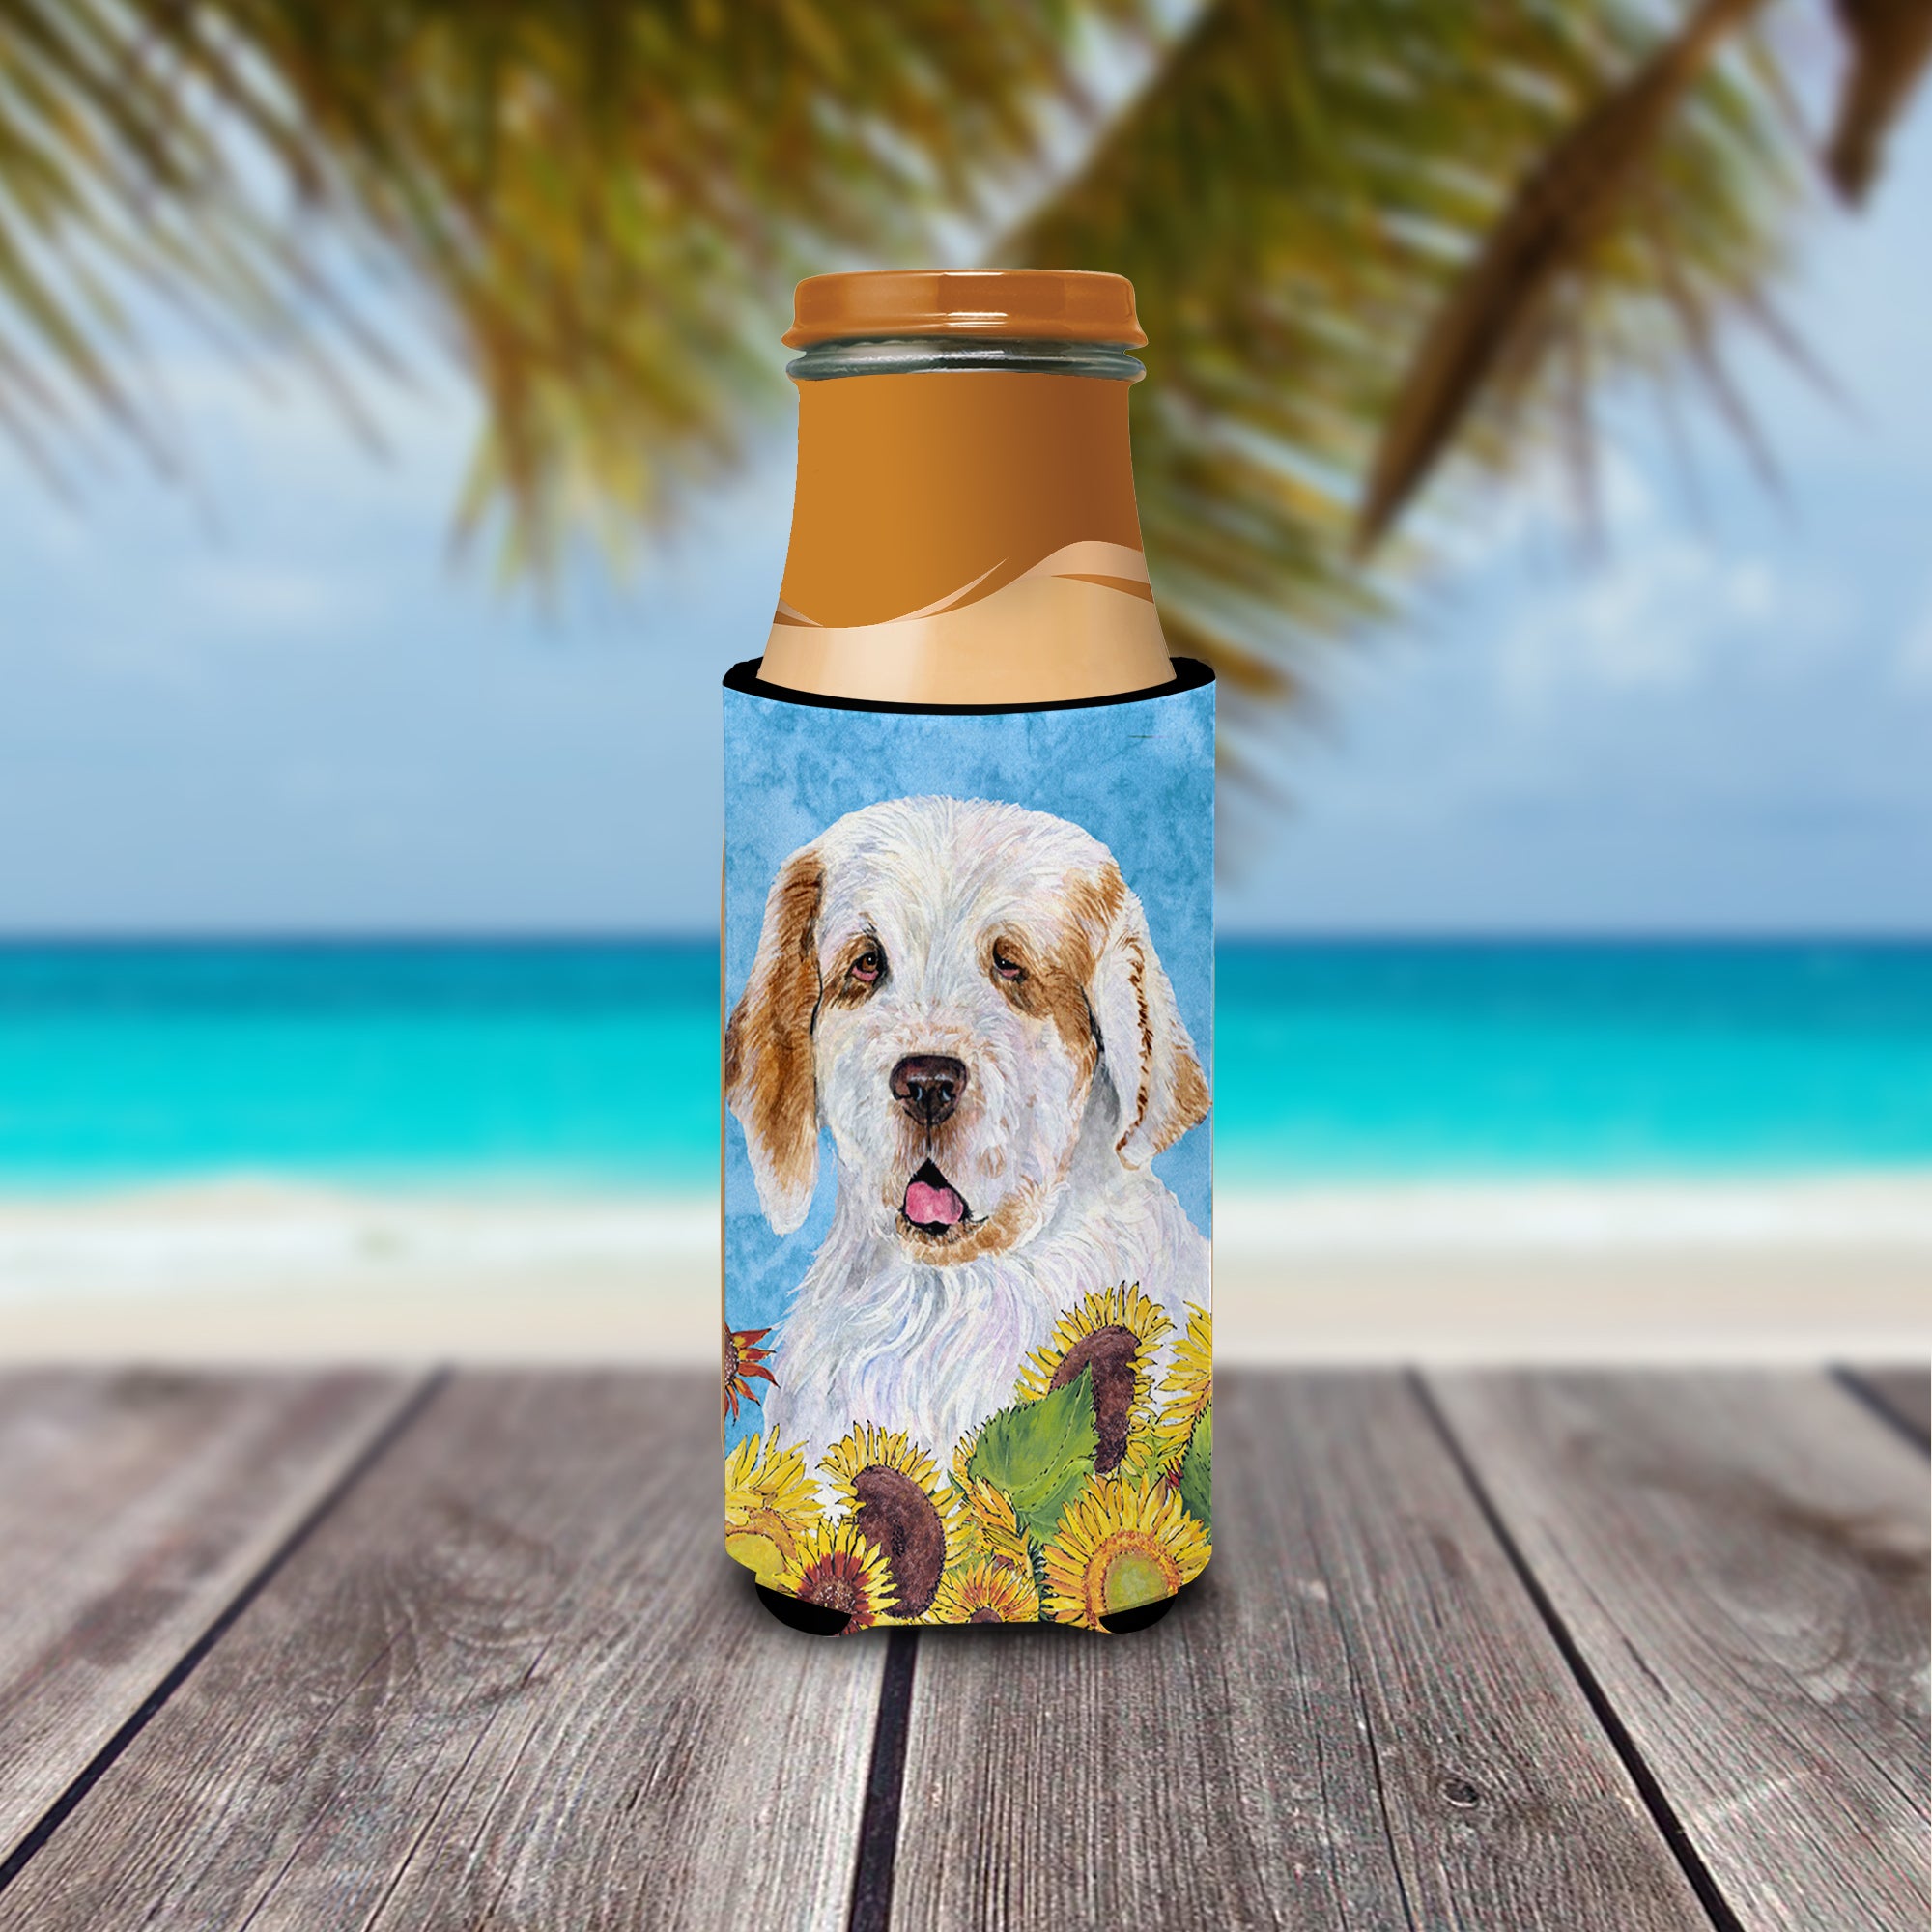 Clumber Spaniel in Summer Flowers Ultra Beverage Insulators for slim cans SS4133MUK